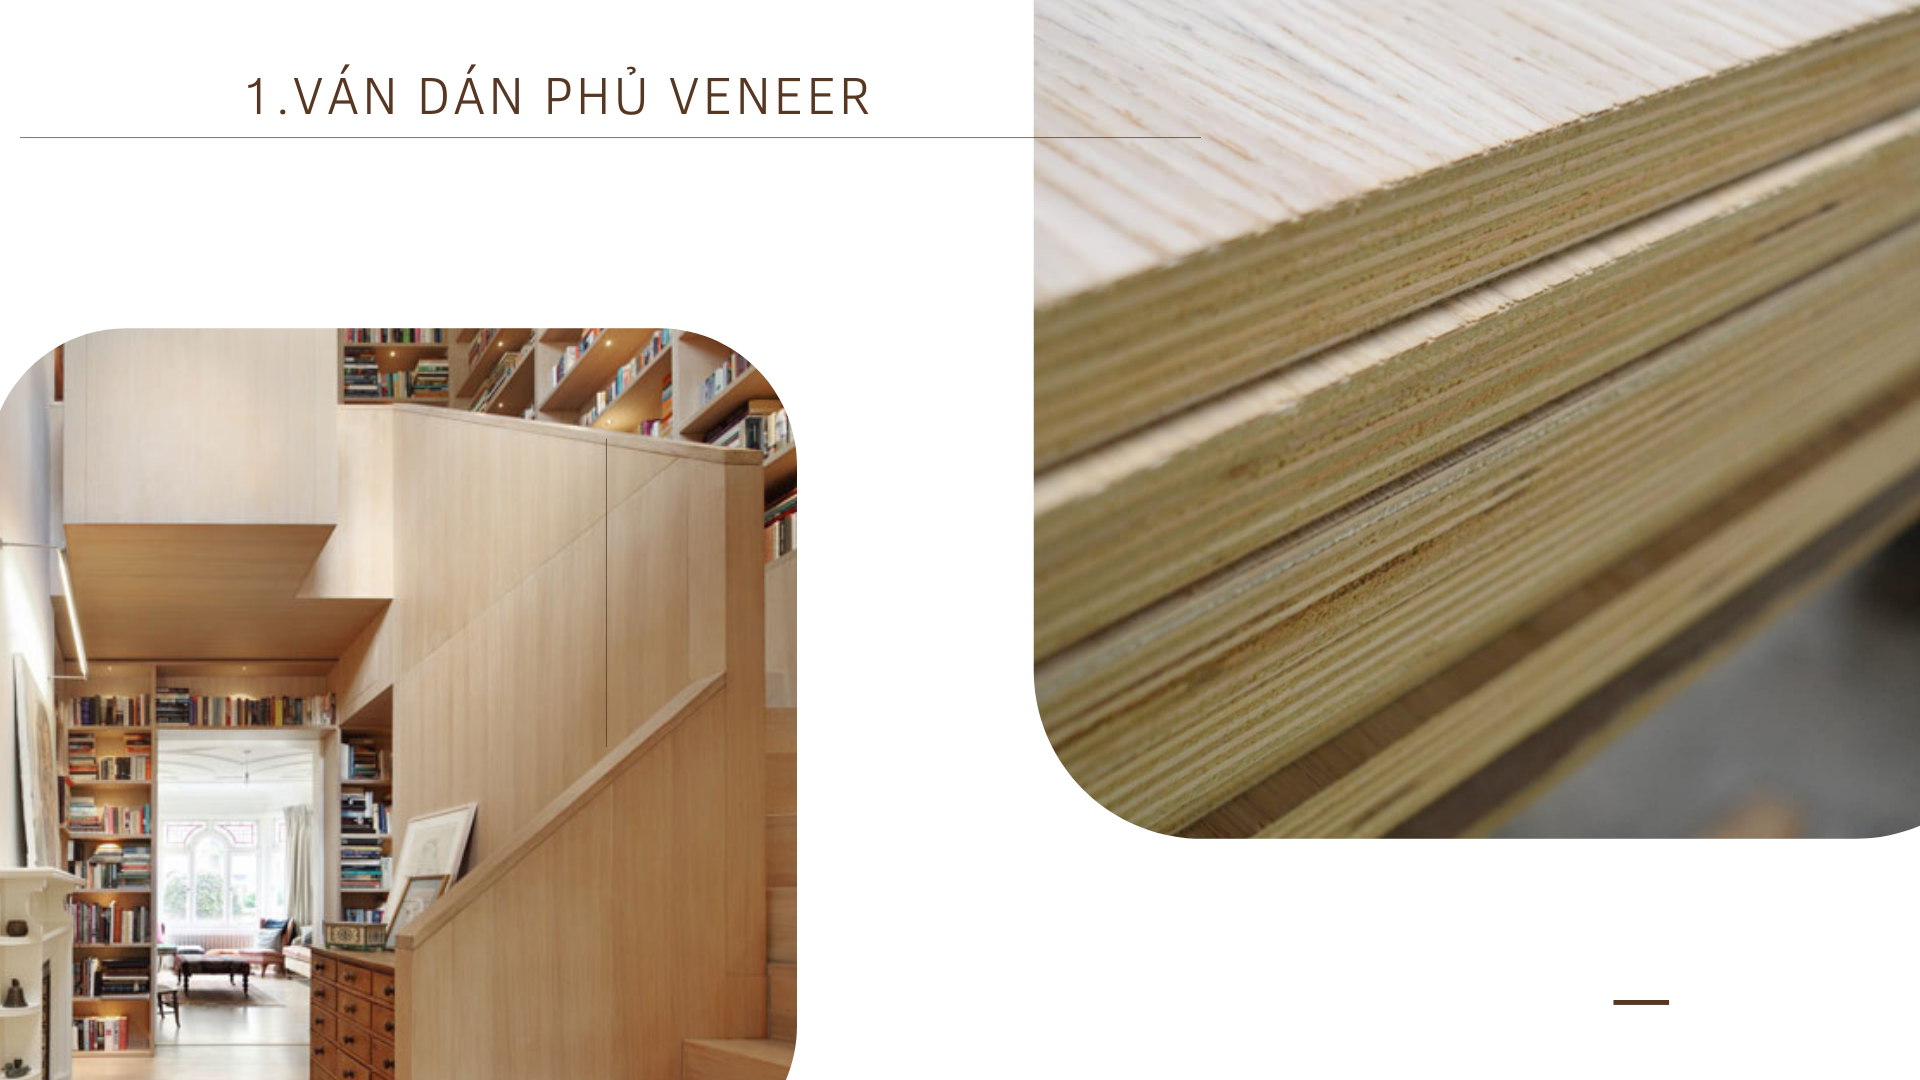 Plywood covered with veneer